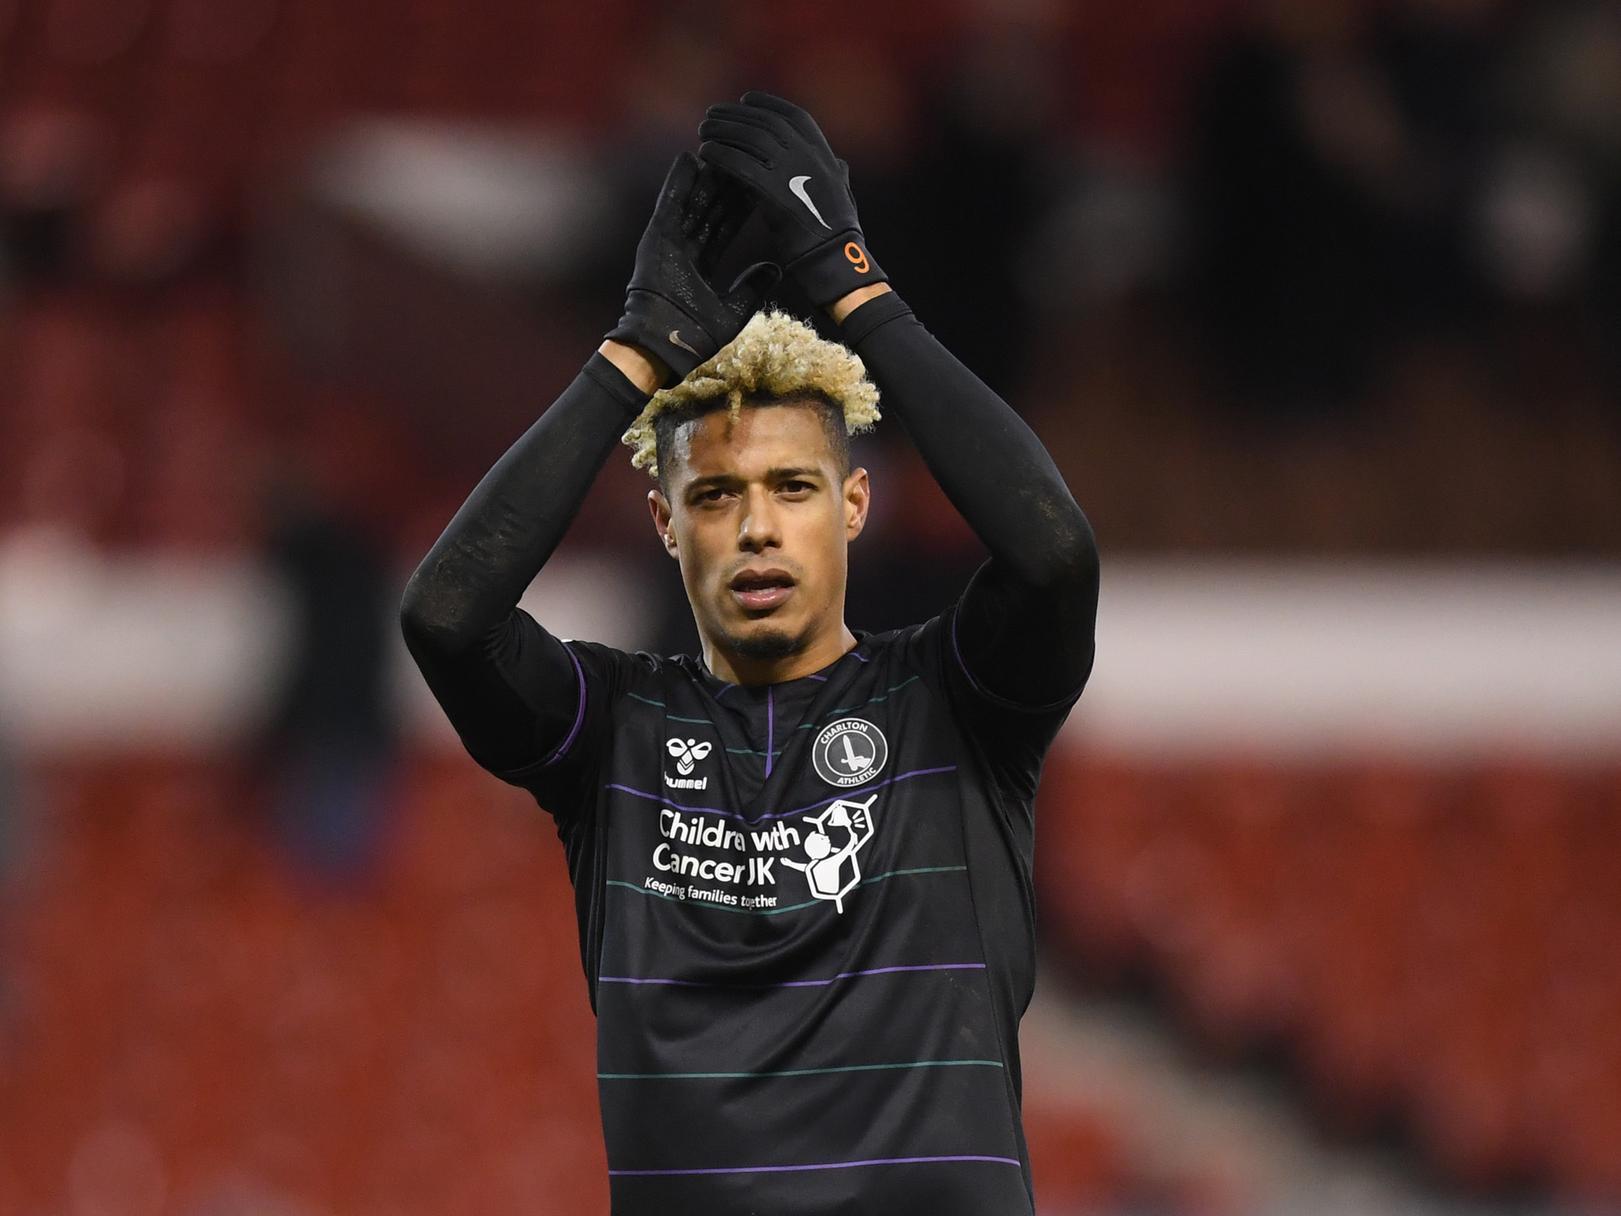 Charlton boss Lee Bowyer has claimed his star Lyle Taylor was justified in his enthusiastic celebrations in front of Luton Town fans on Saturday, stating he was merely giving back stick he'd already received. (South London Press)